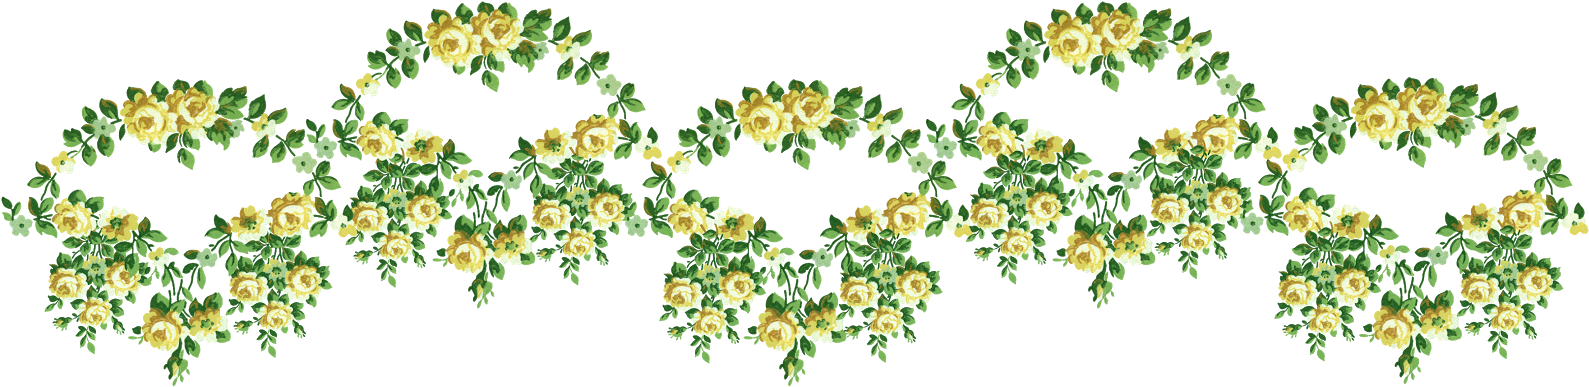 Artist Paper Flowers Borders Png - Portable Network Graphics (1600x400)